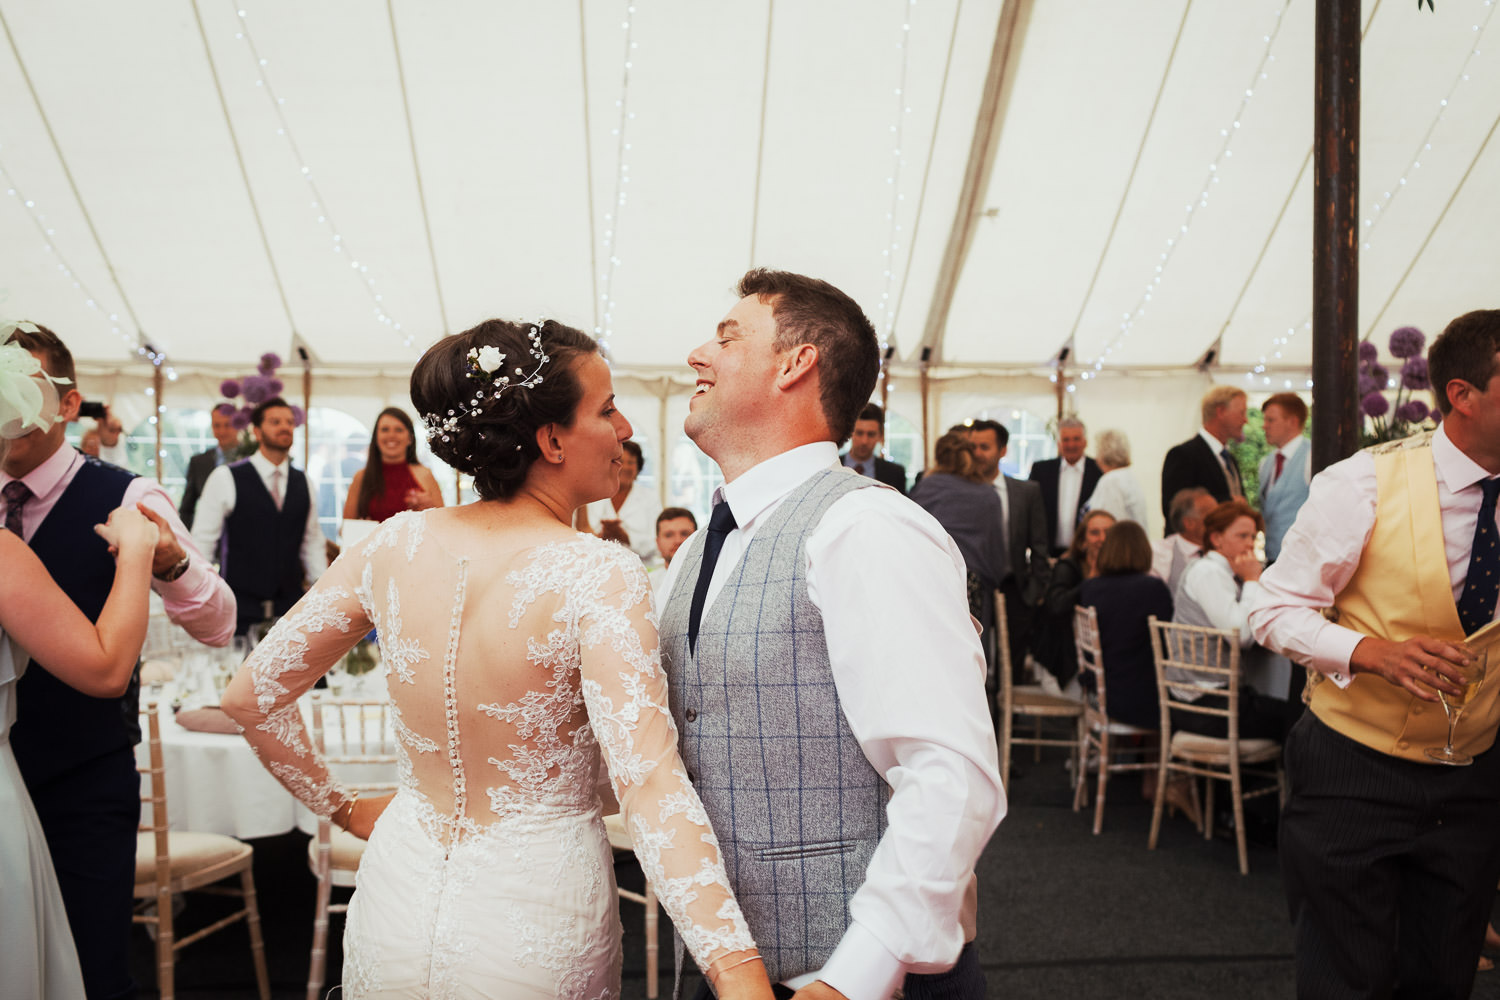 Bride and groom have their first dance with their friends and family